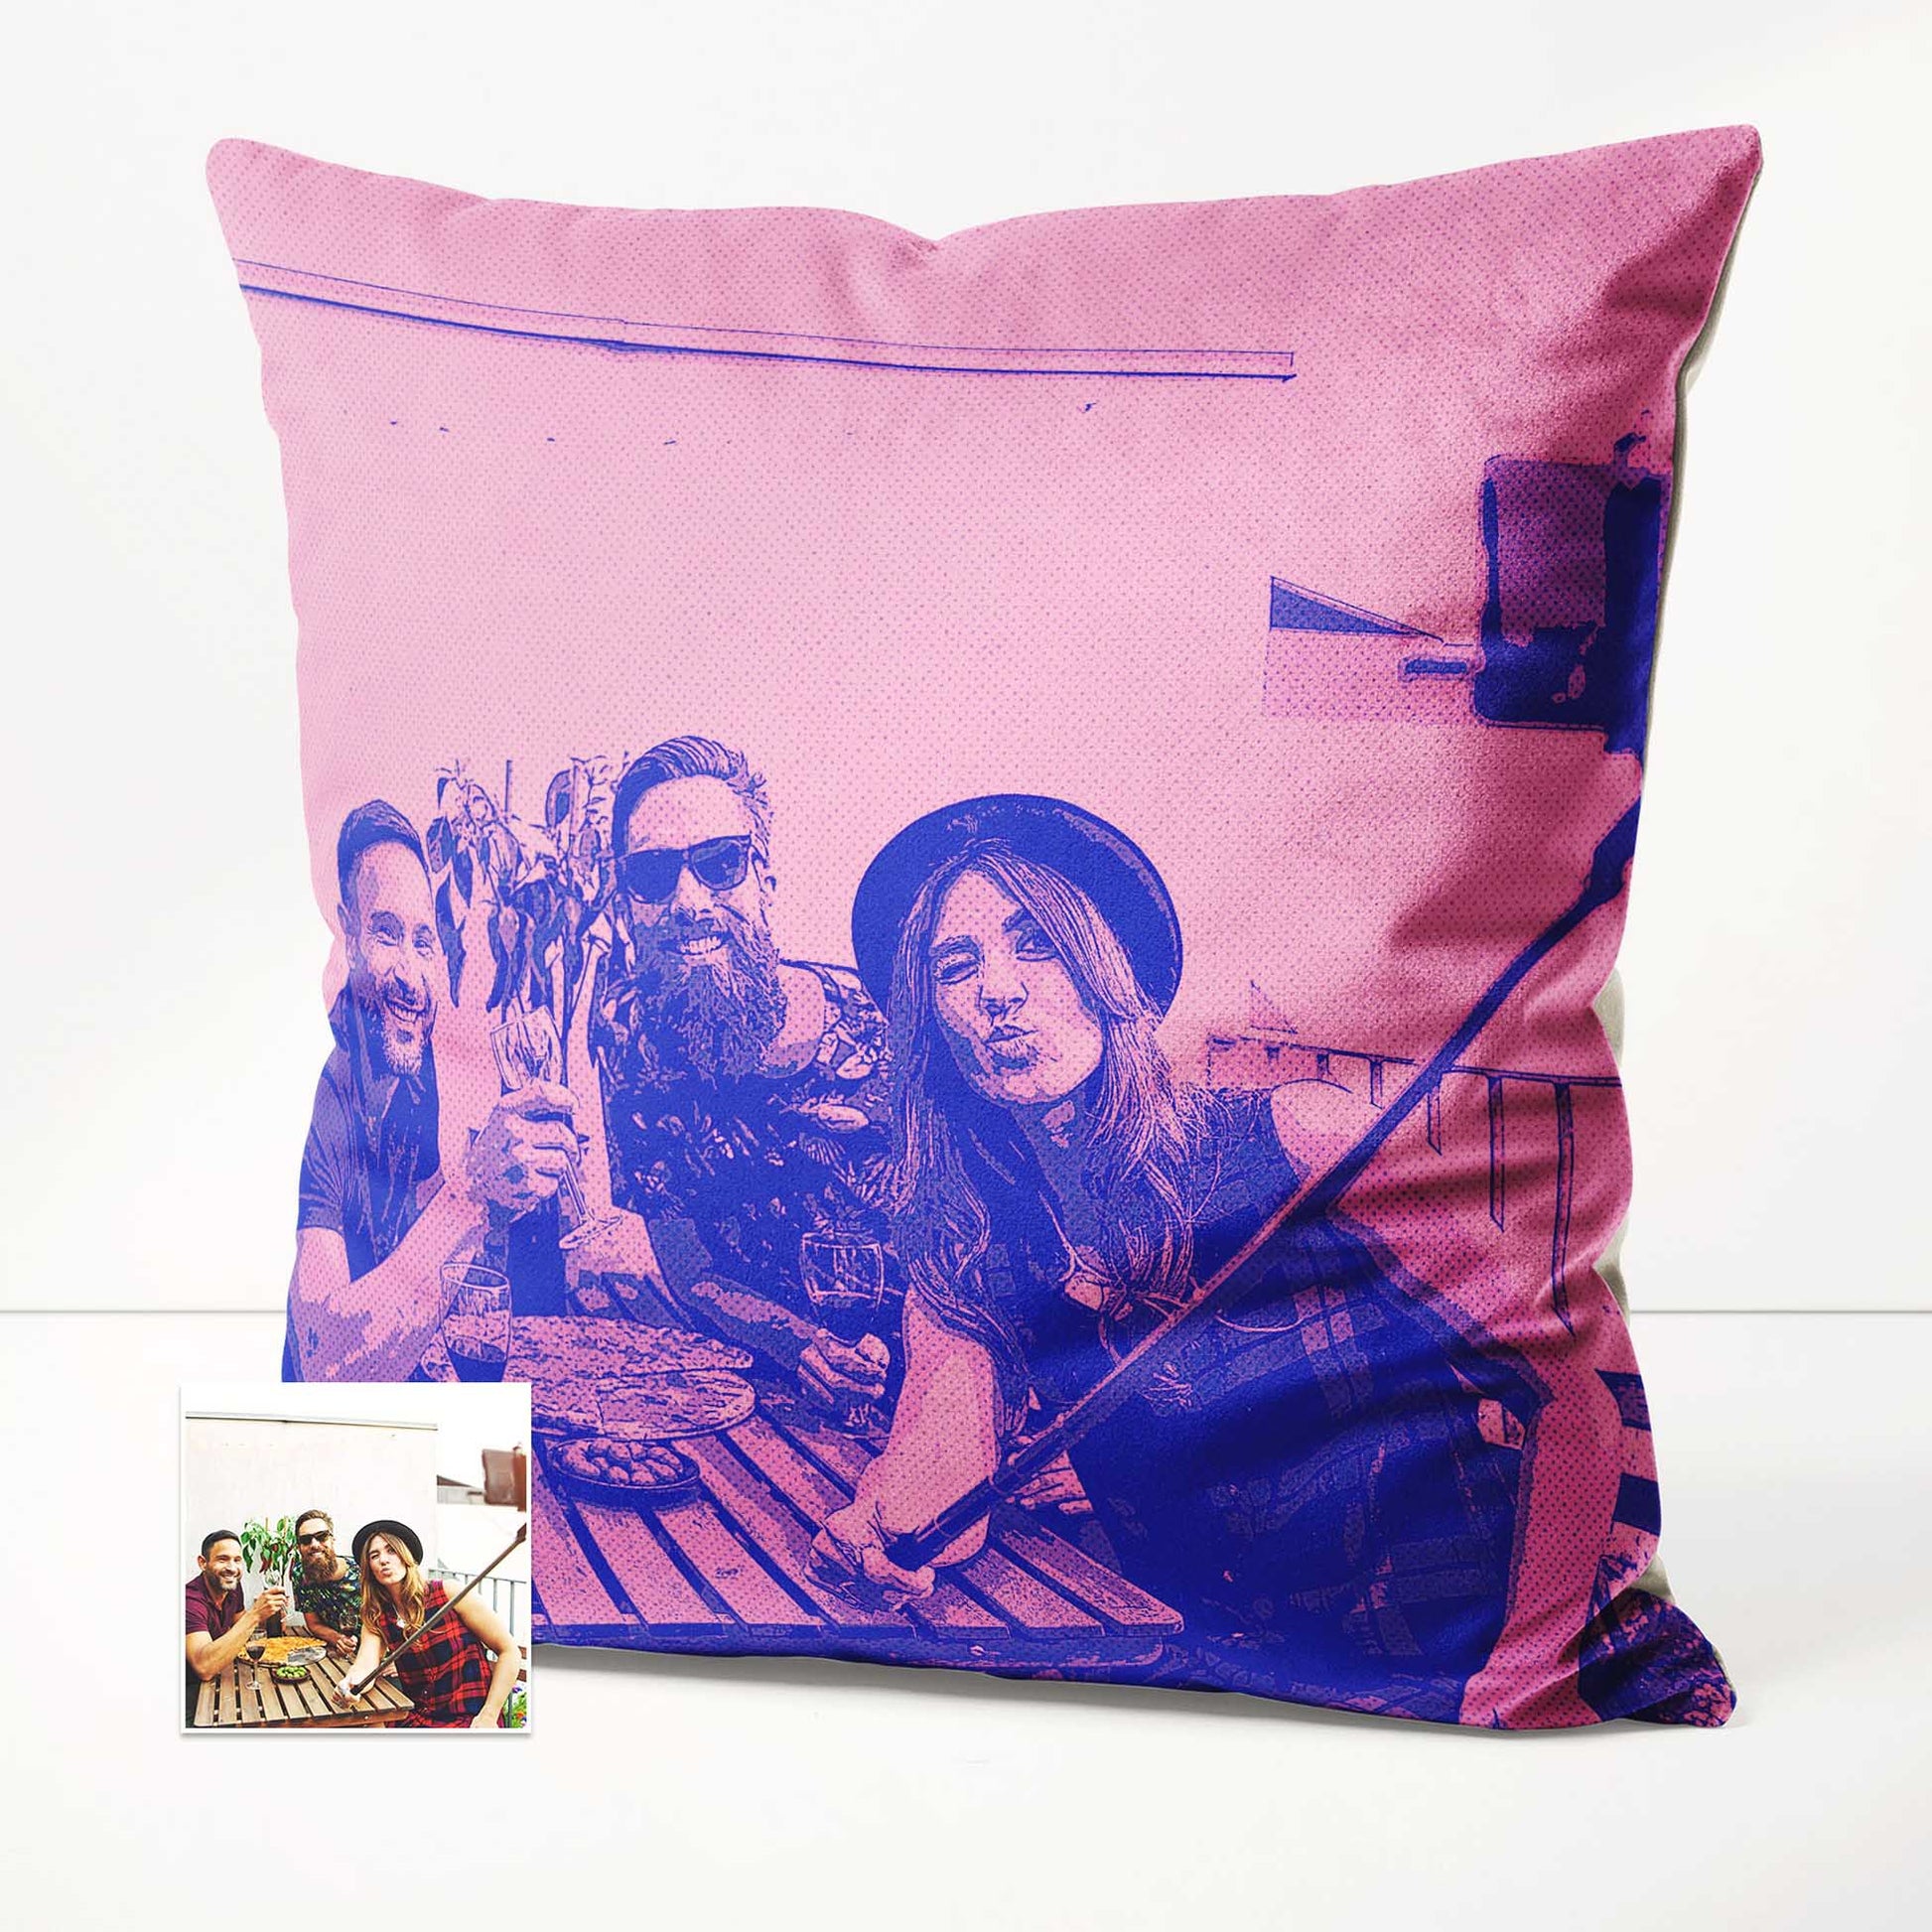 Step into a world of vibrant imagination with our Personalised Purple and Pink Comics Cushion. Inspired by old-school cartoons, this handmade cushion brings a retro charm to your home decor. Capture your photo in a personalized comic 